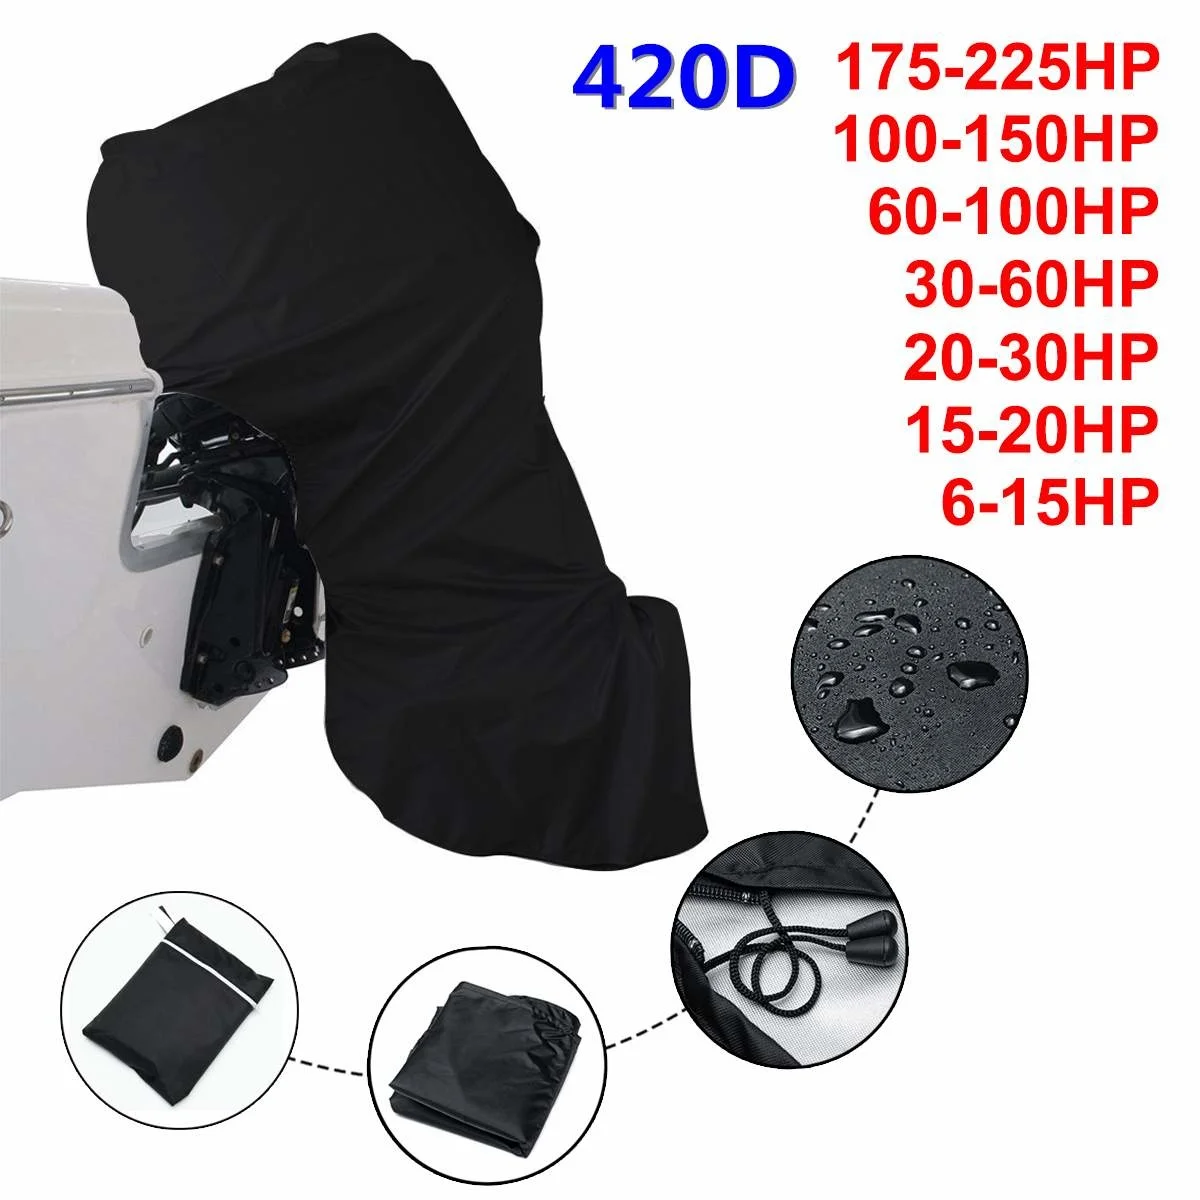 

6-225HP 420D Black Marine Full Outboard Engine Cover Waterproof Sunscreen Barco Boat Outboard Motor Dustproof Protect Canvas